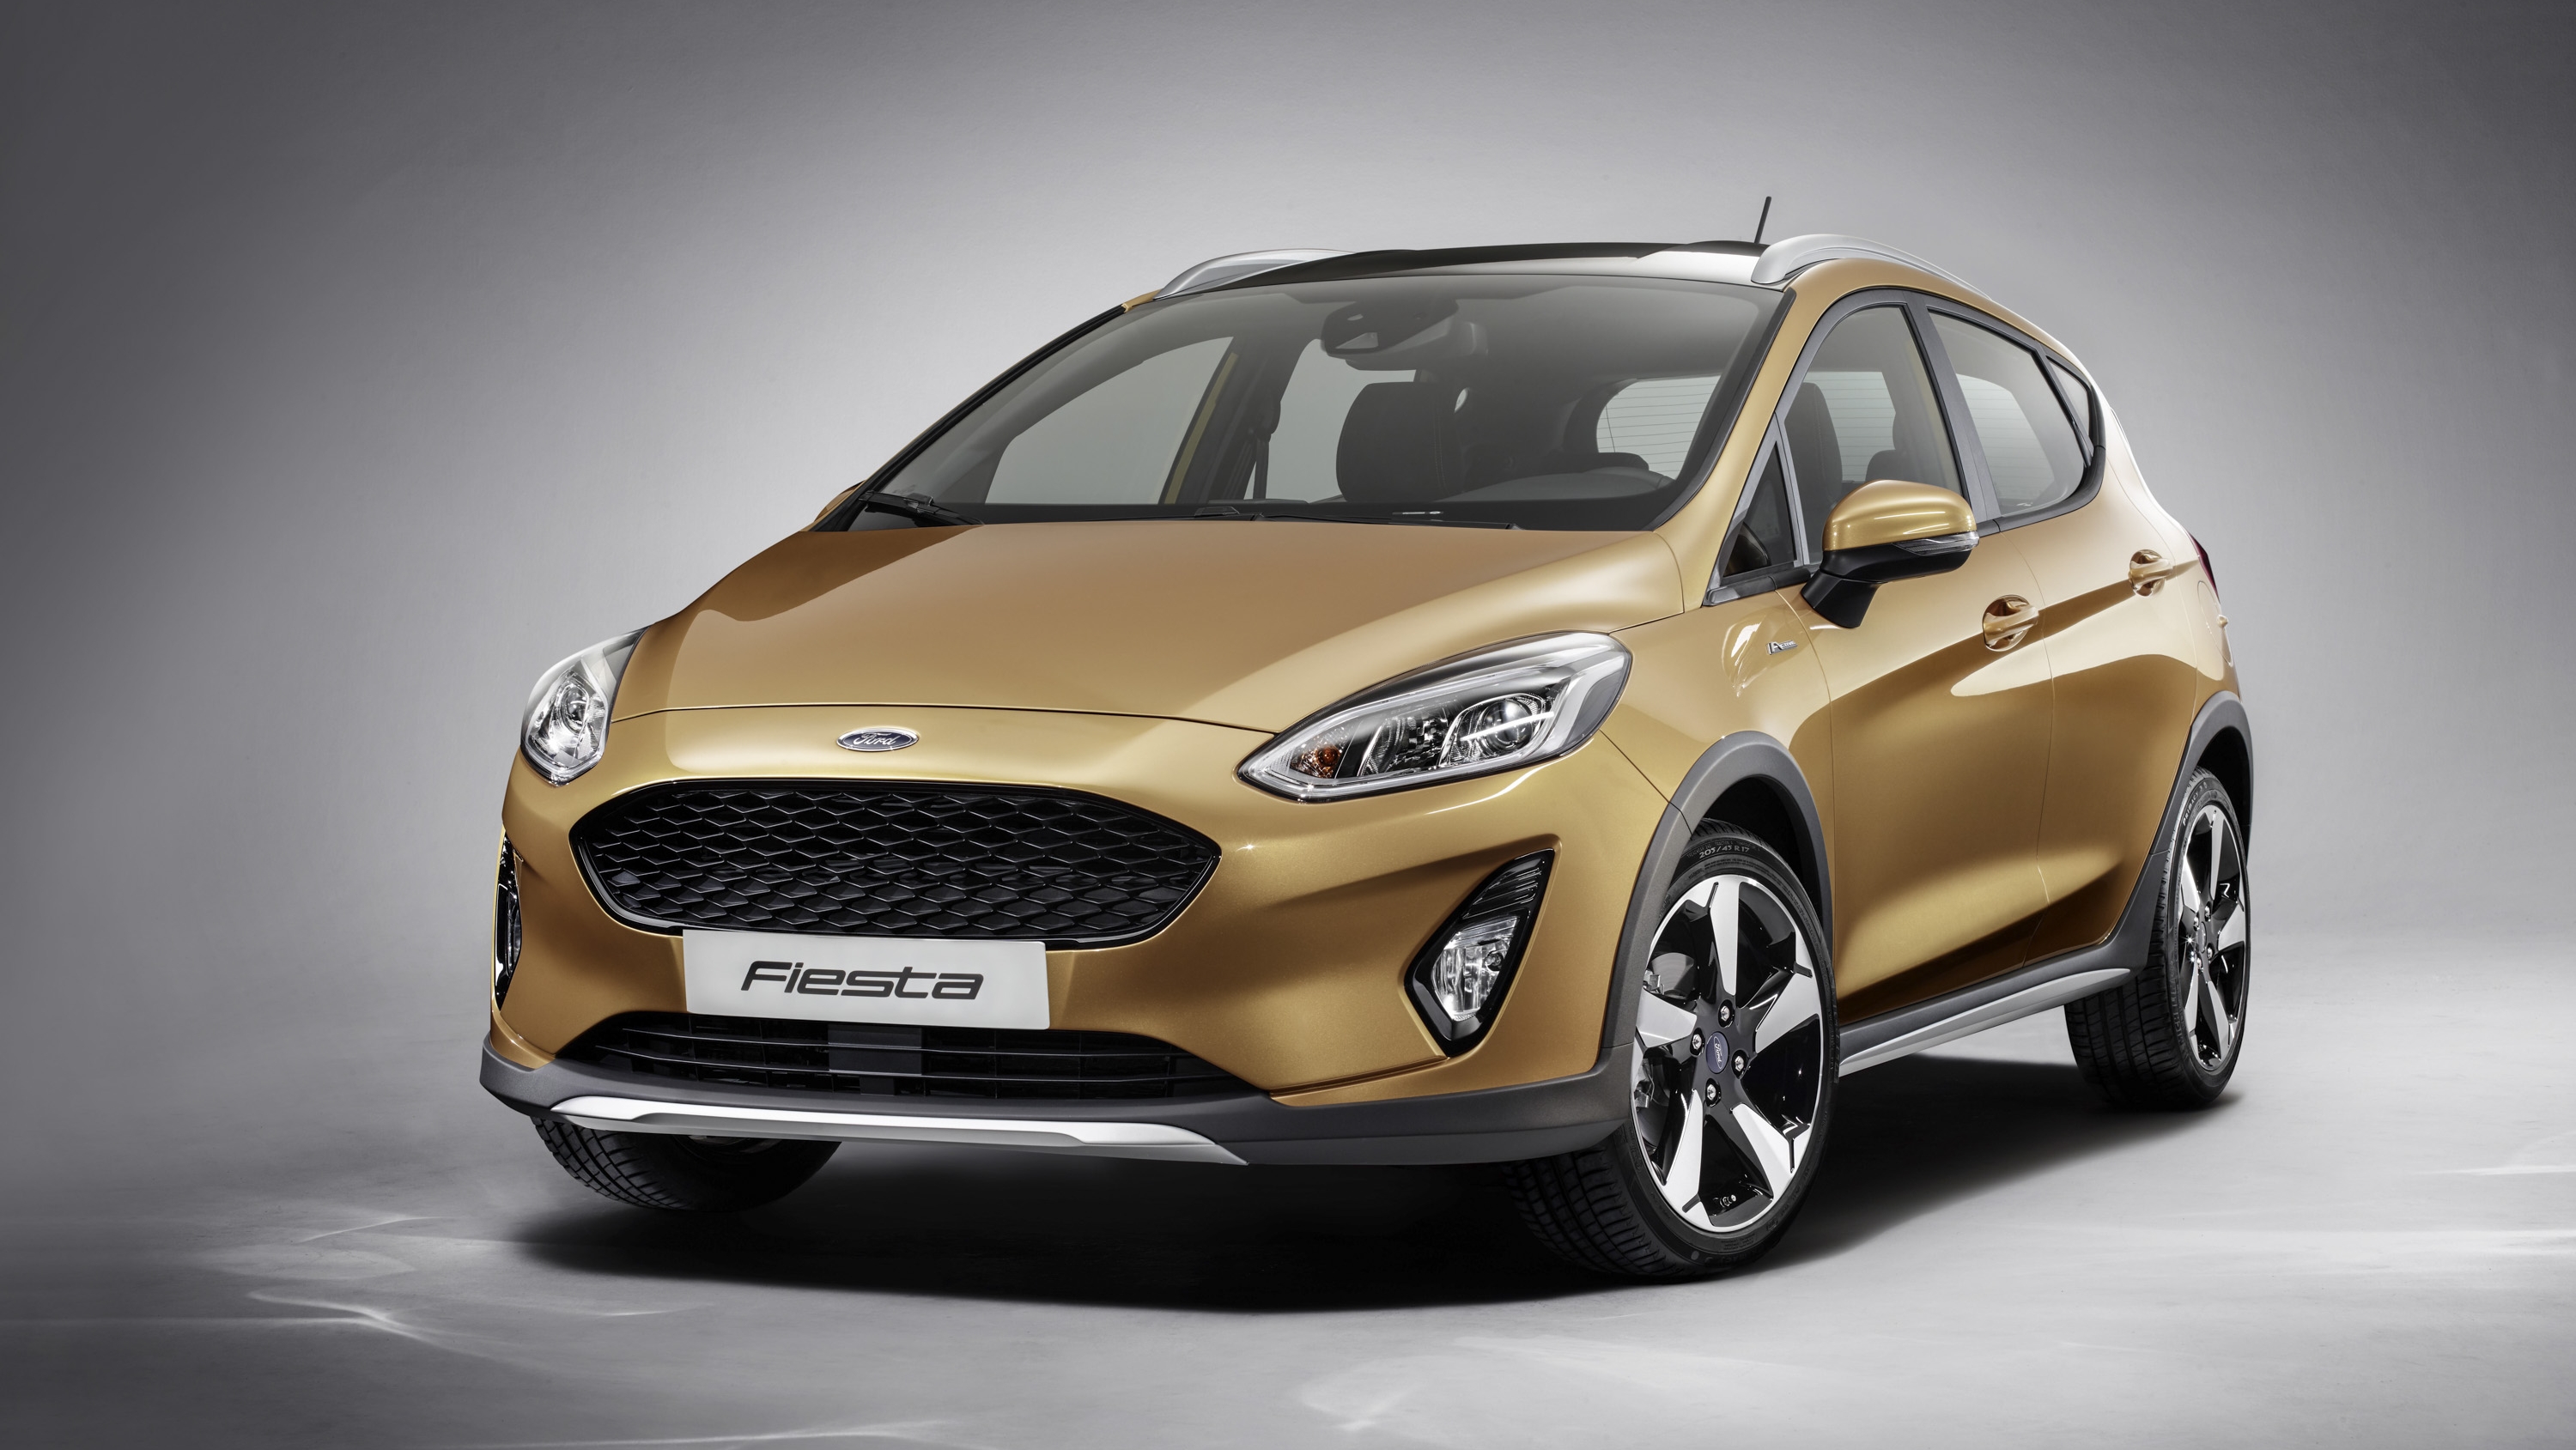 Ford Fiesta Active Picture, Photo, Wallpaper